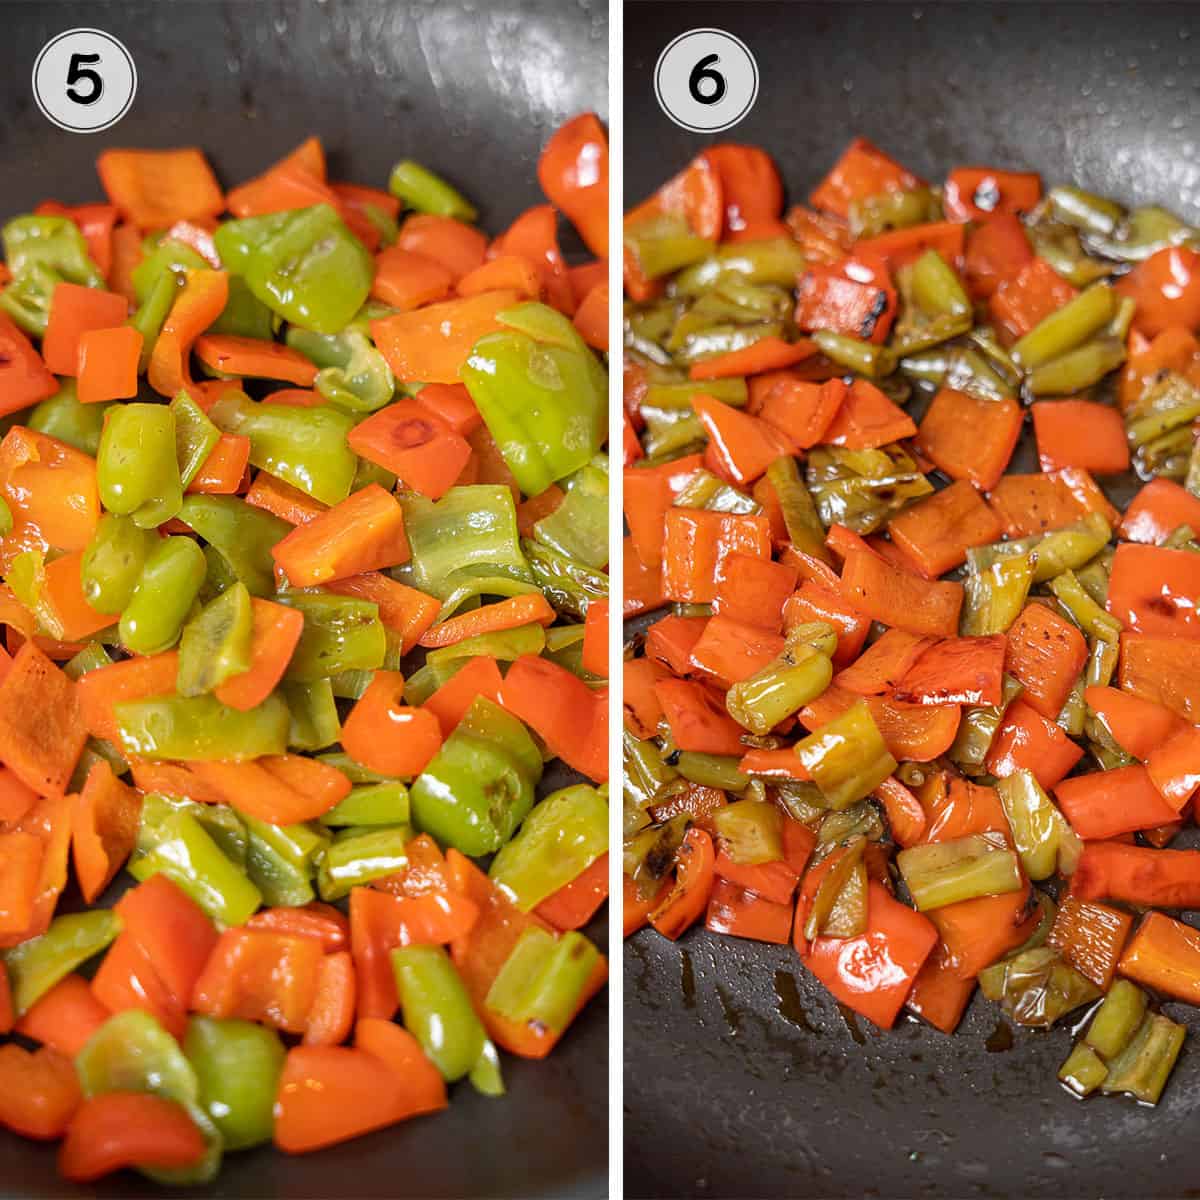 bell peppers before and after being sautéed.